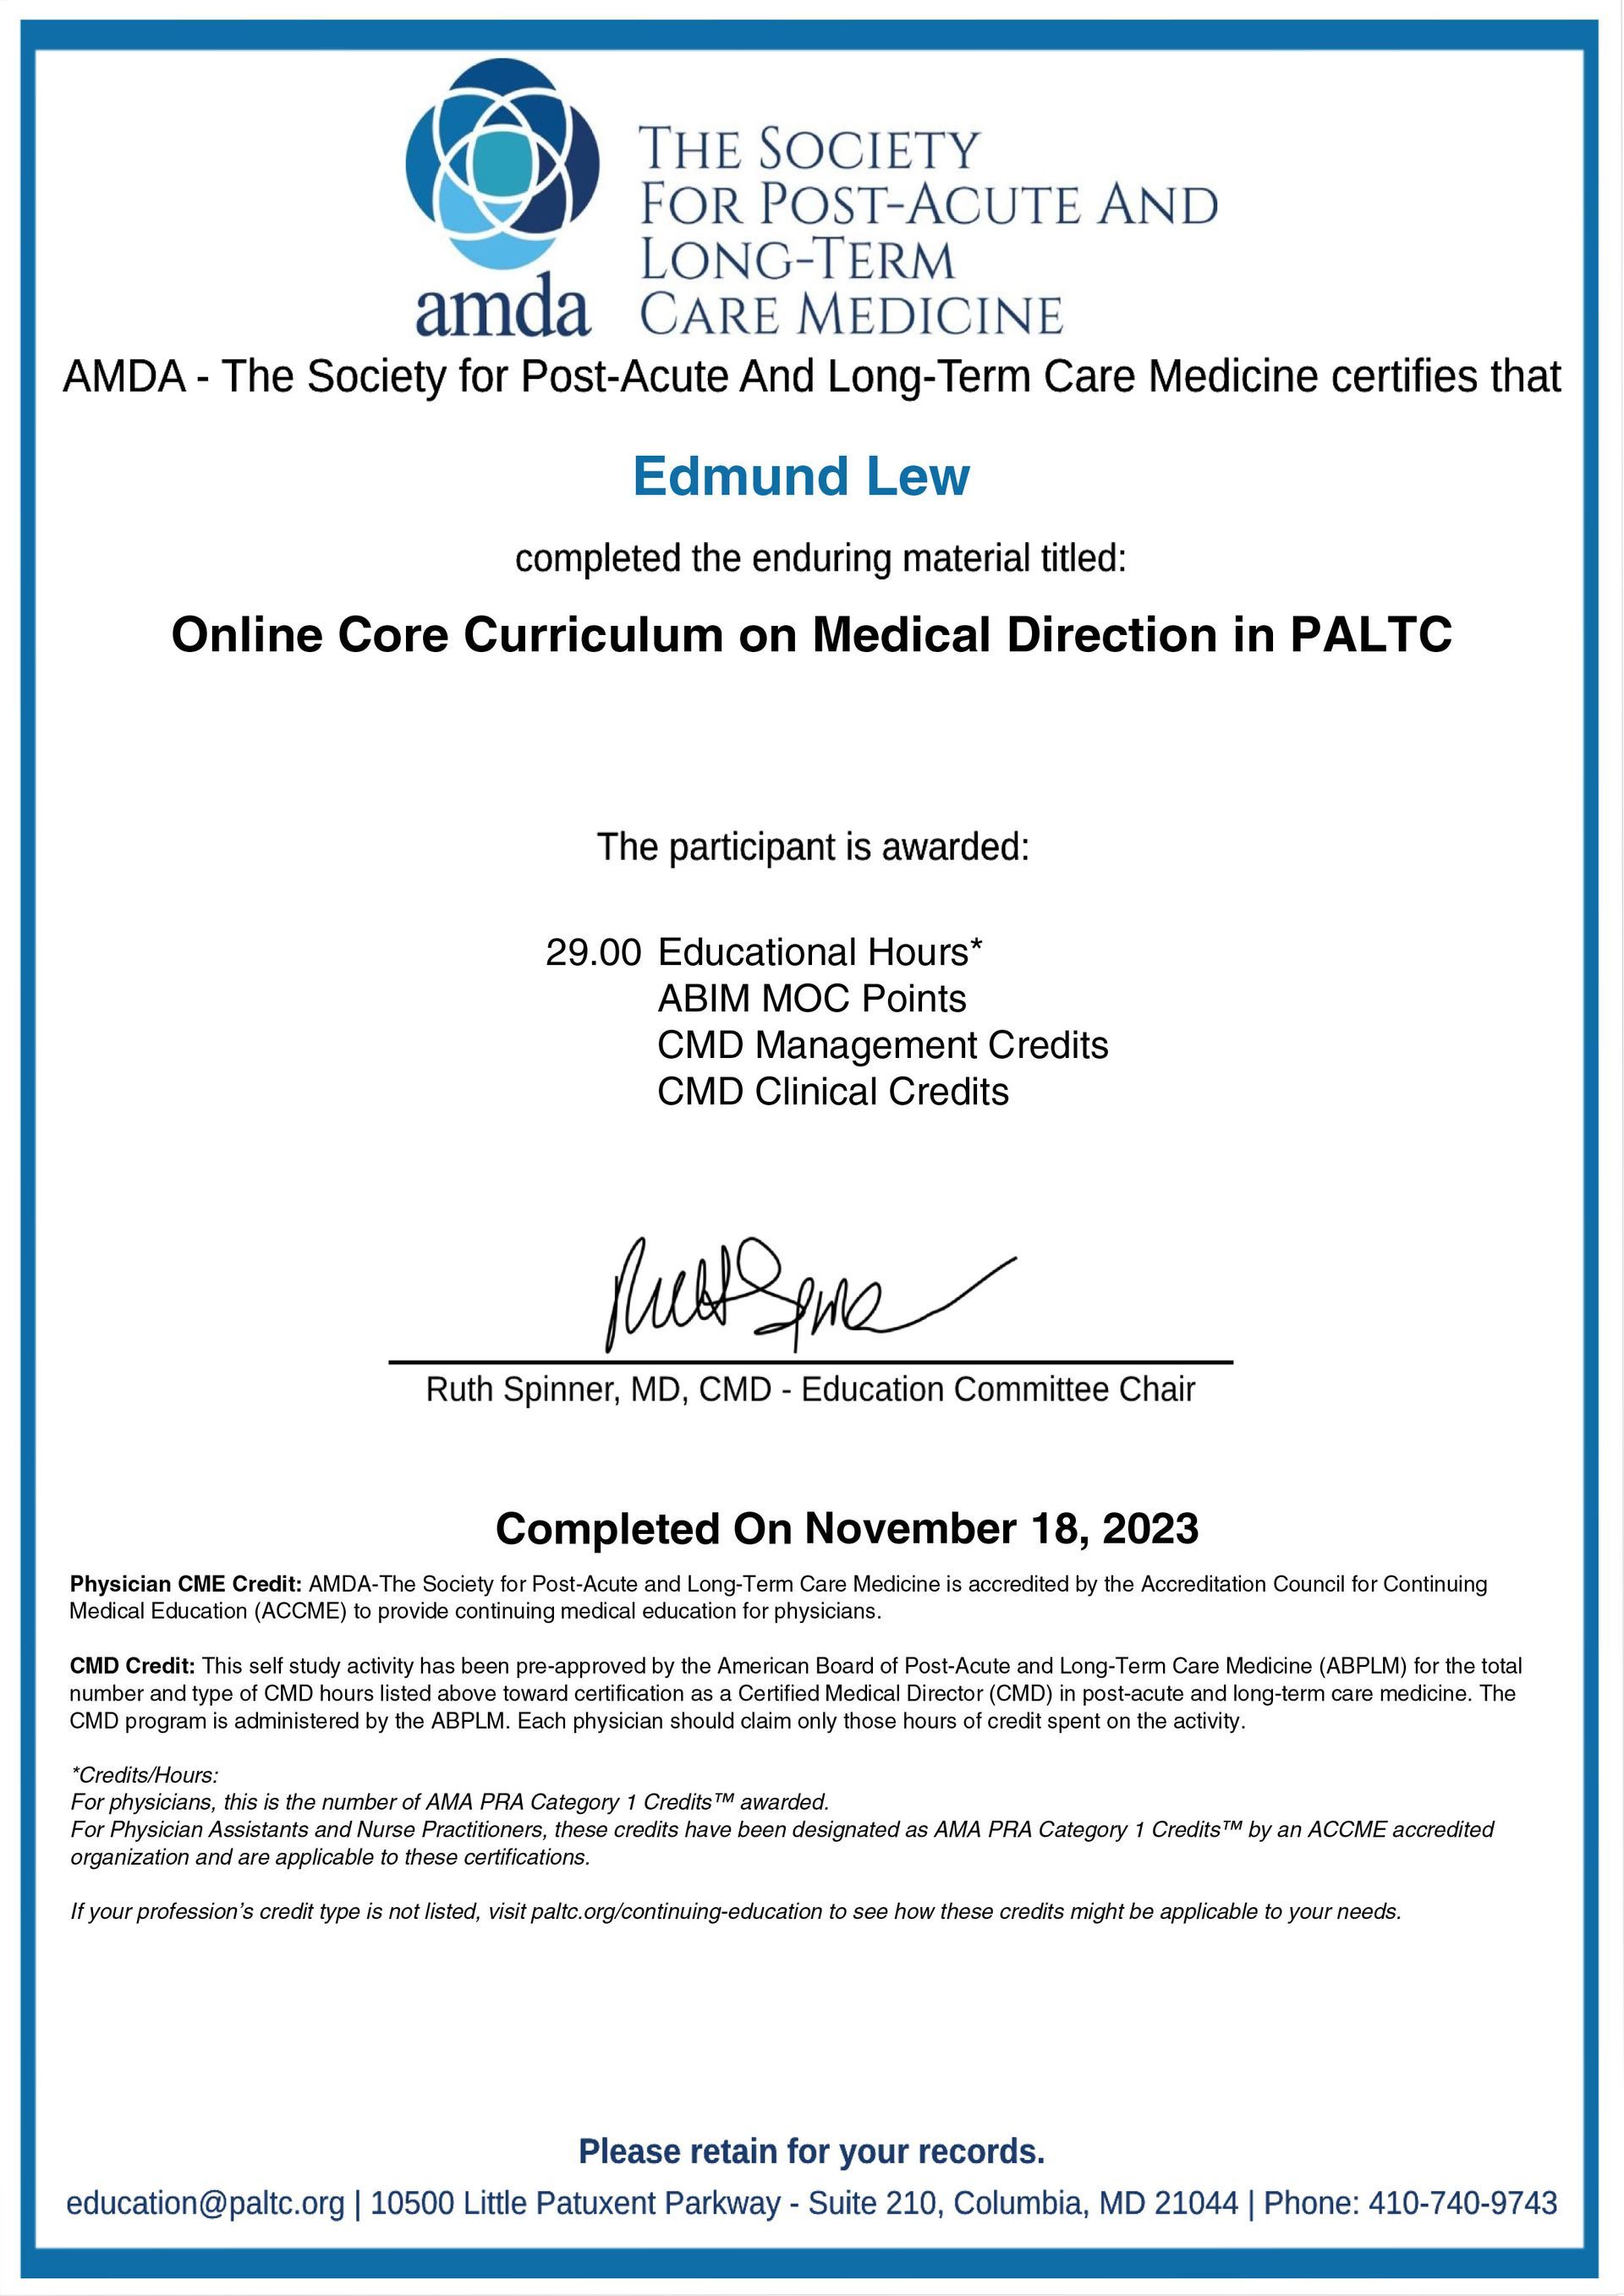 Online Core Curriculum on Medical Direction in PALTC